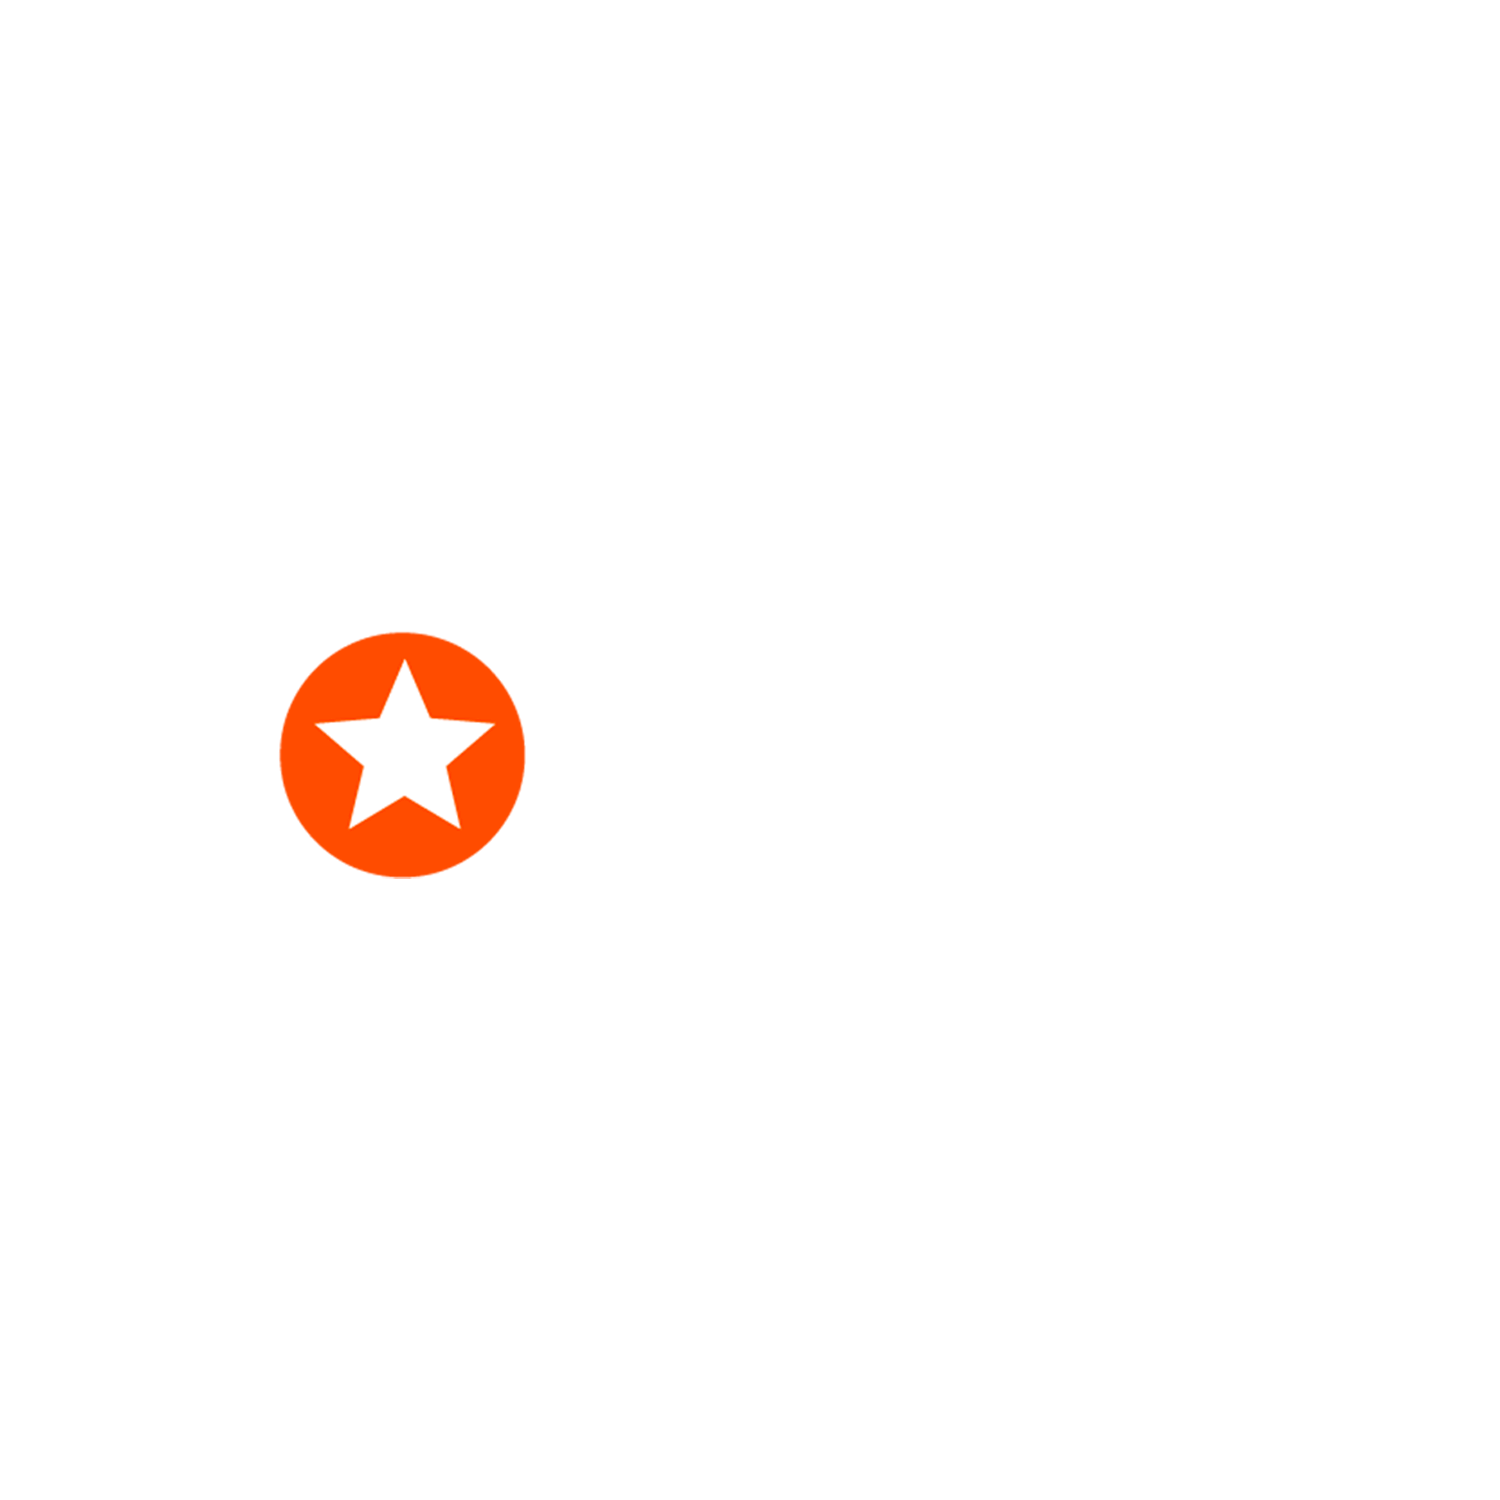 Register at Mostbet and bet on cricket legally from India.